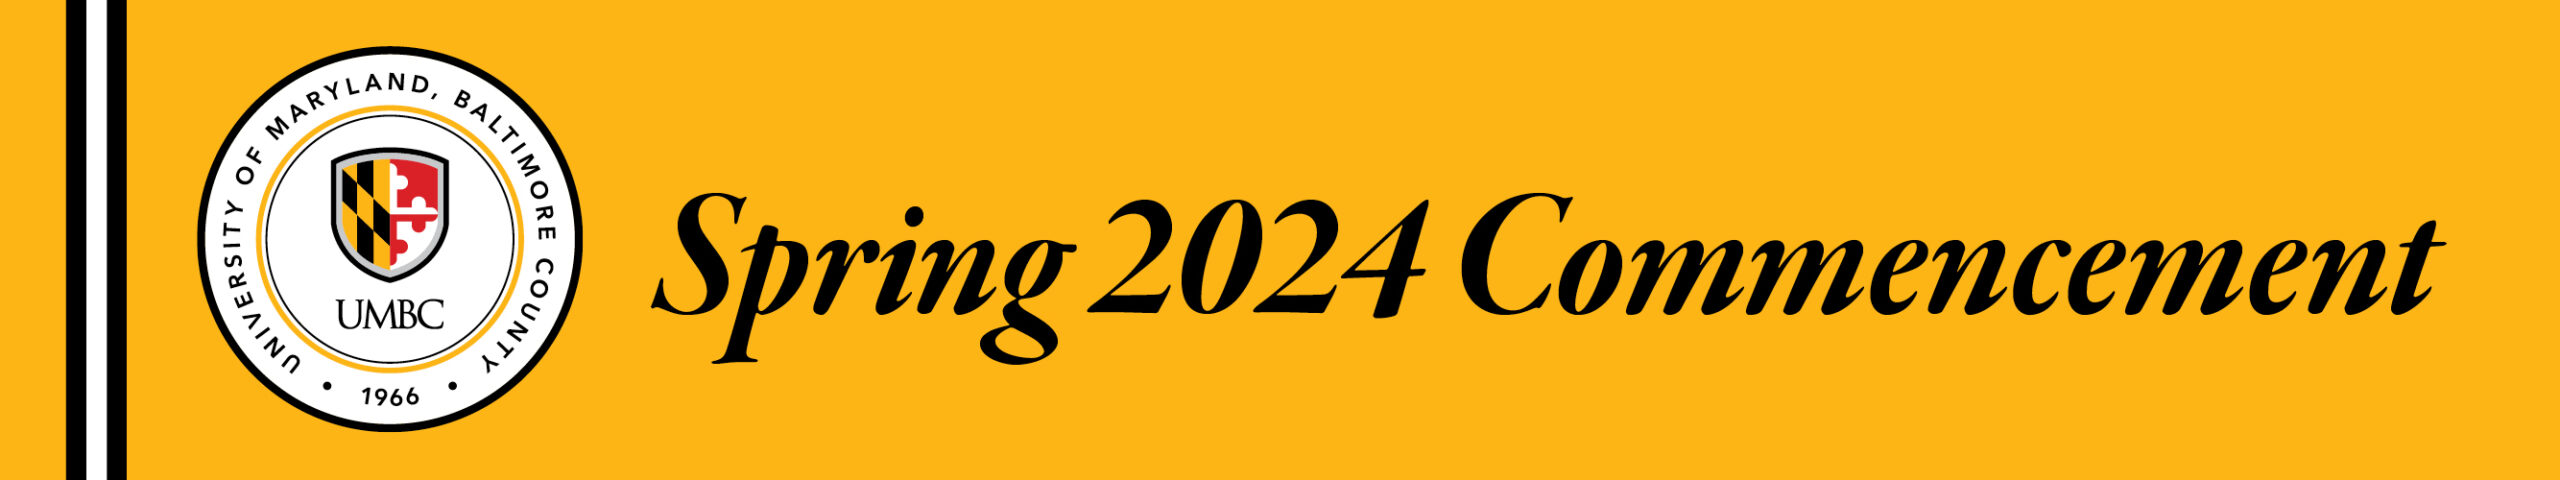 Spring 2024 Commencement banner